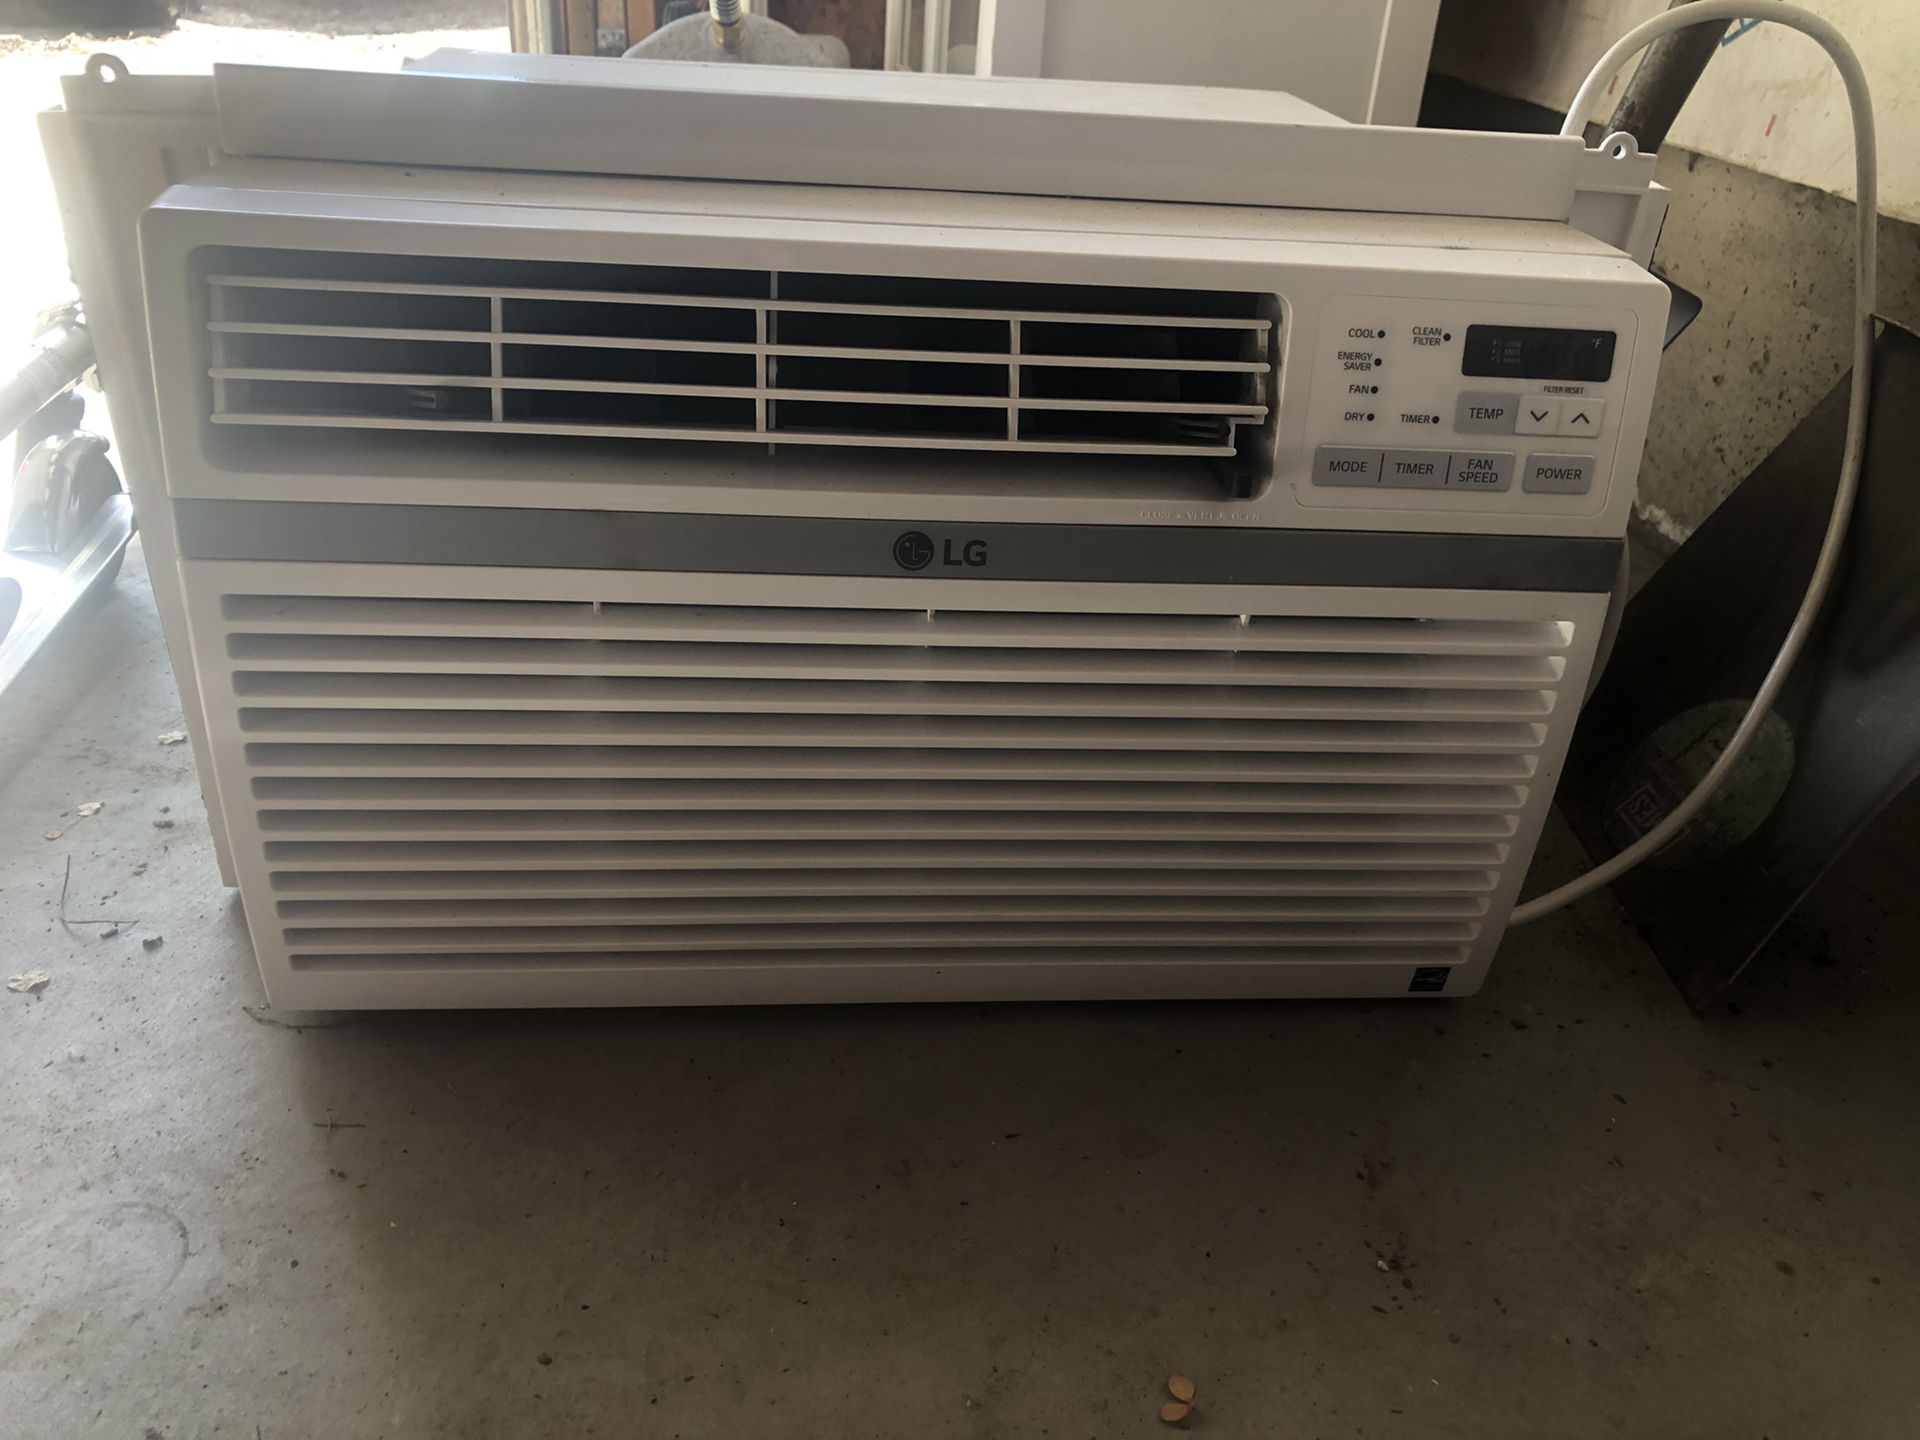 1 year old LG Window Air Conditioner with Mounting Bracket